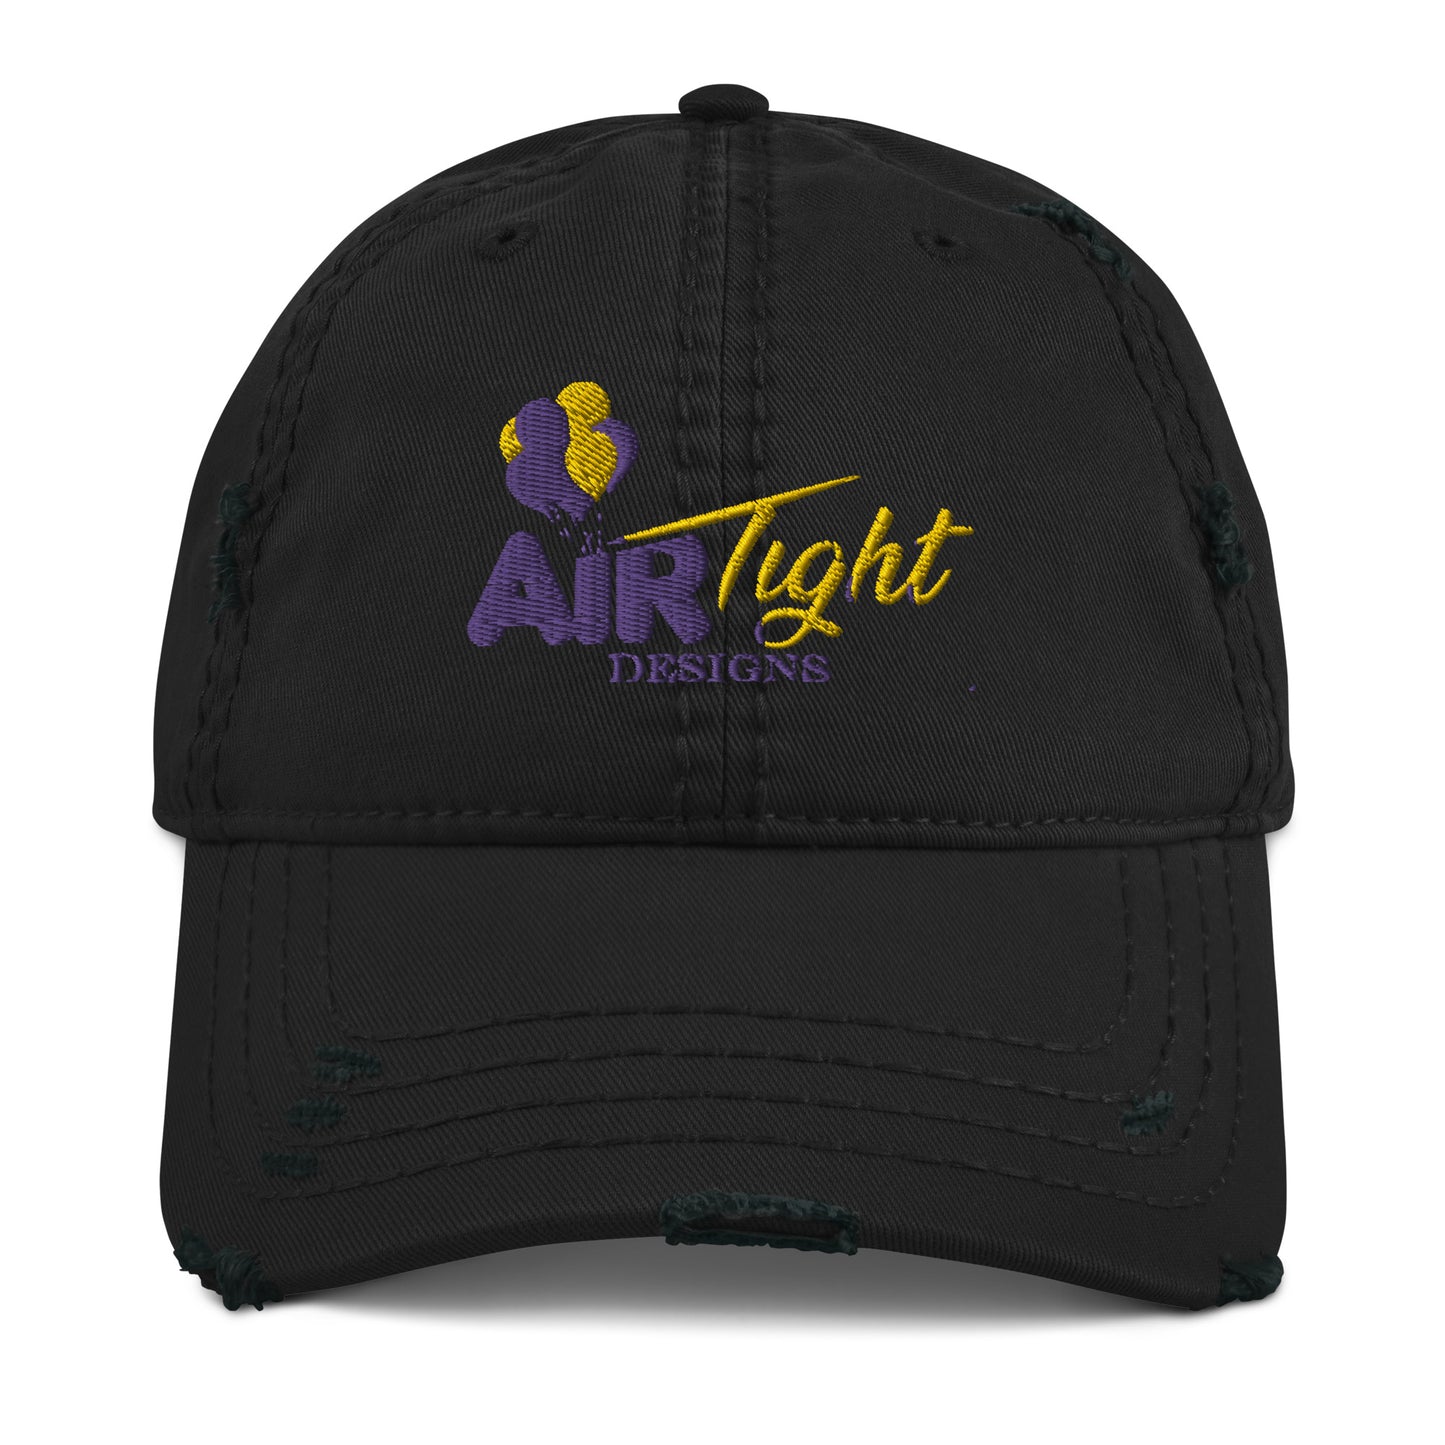 Air Tight Designs Embroidered  Distressed Dad Hat